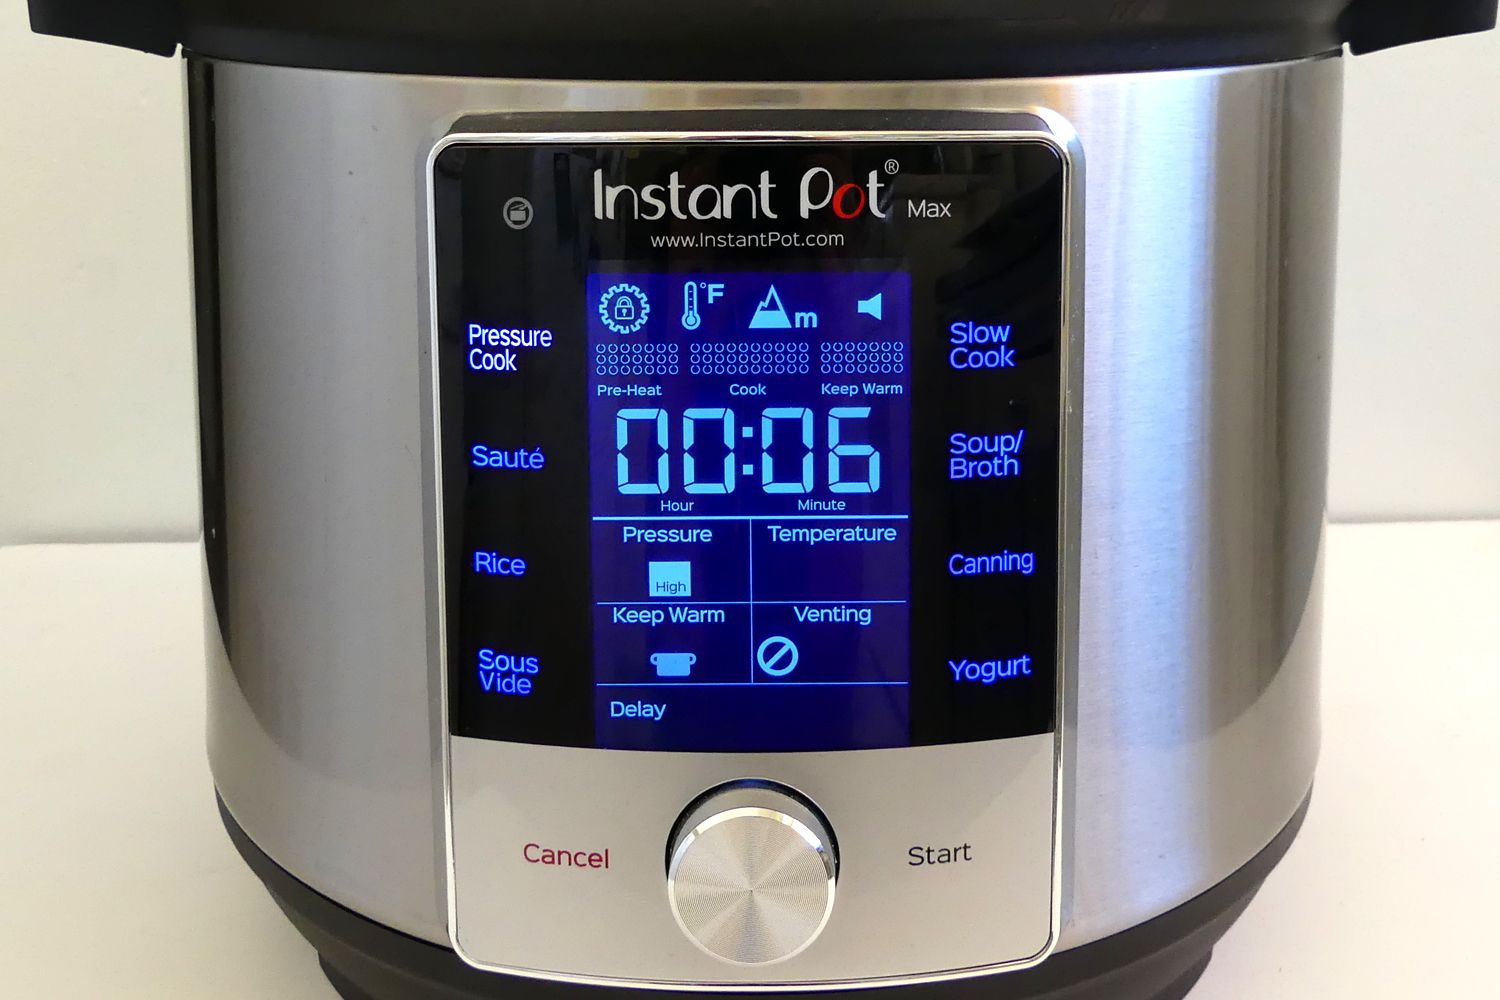 Cook for six minutes in the Instant Pot